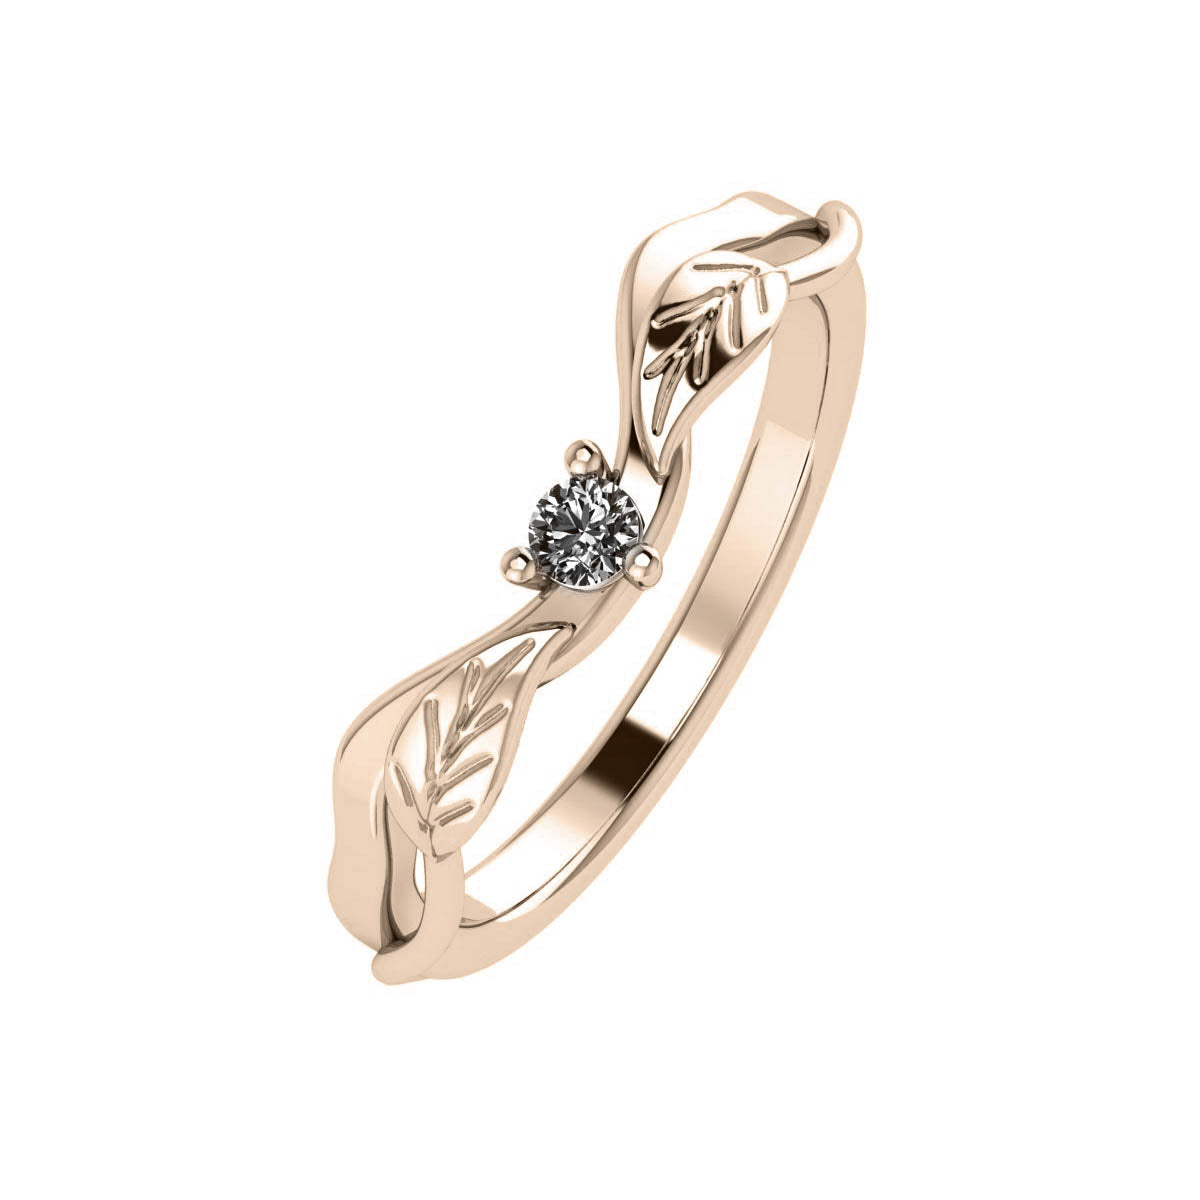 Matching wedding band for Clematis: choose yours - Eden Garden Jewelry™